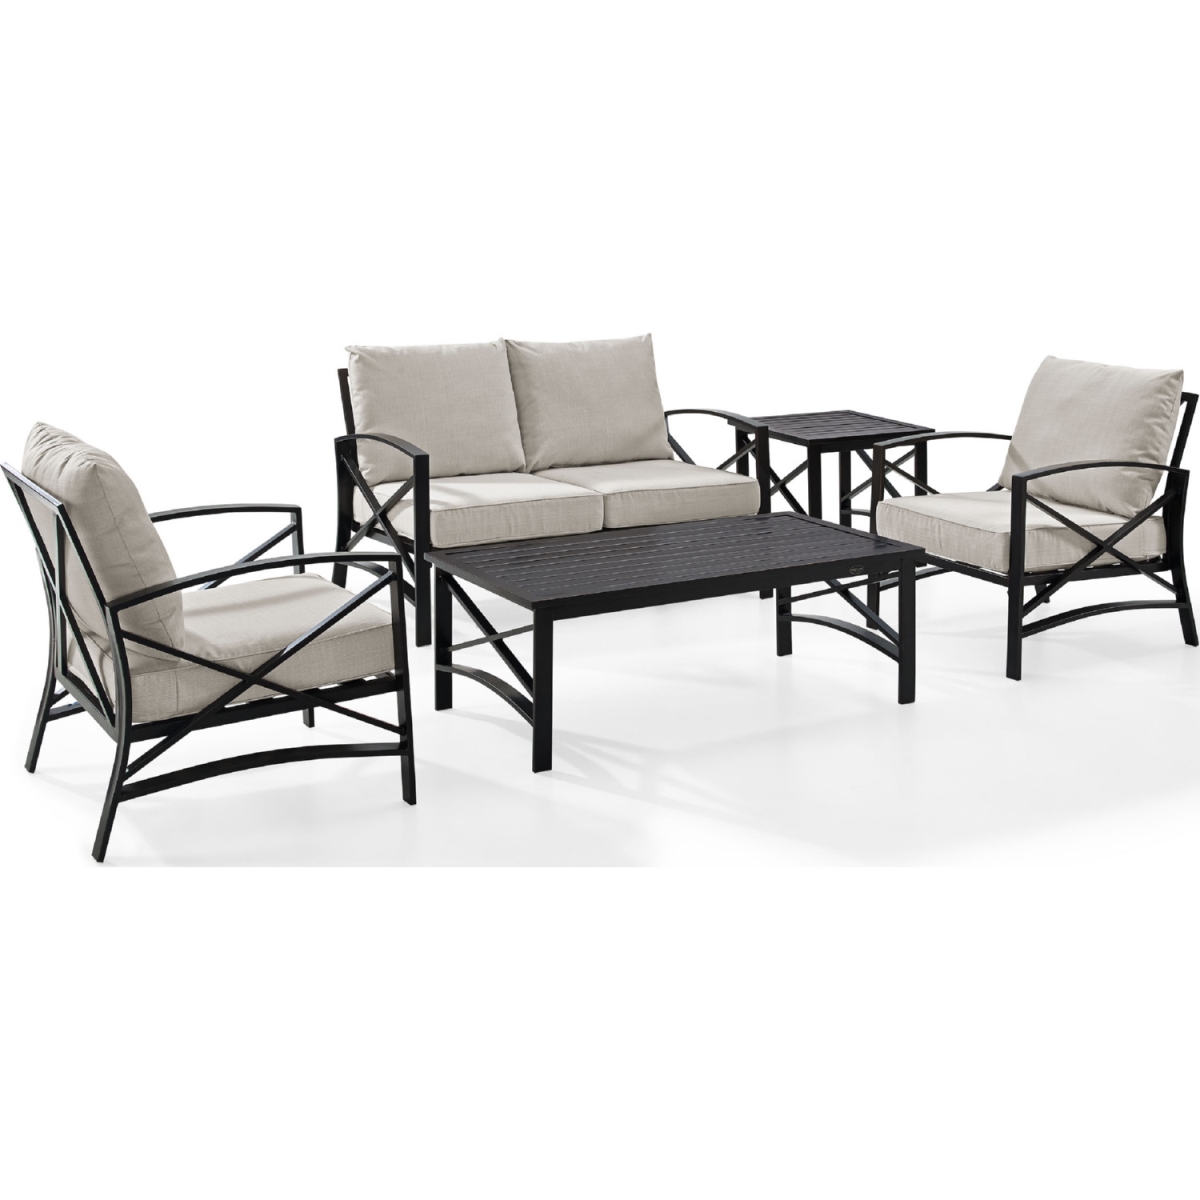 Crosley KO60015BZ-OL 5 Piece Kaplan Outdoor Seating Set with Oatmeal Cushion - Loveseat, Two Chairs, Coffee Table, Side Table